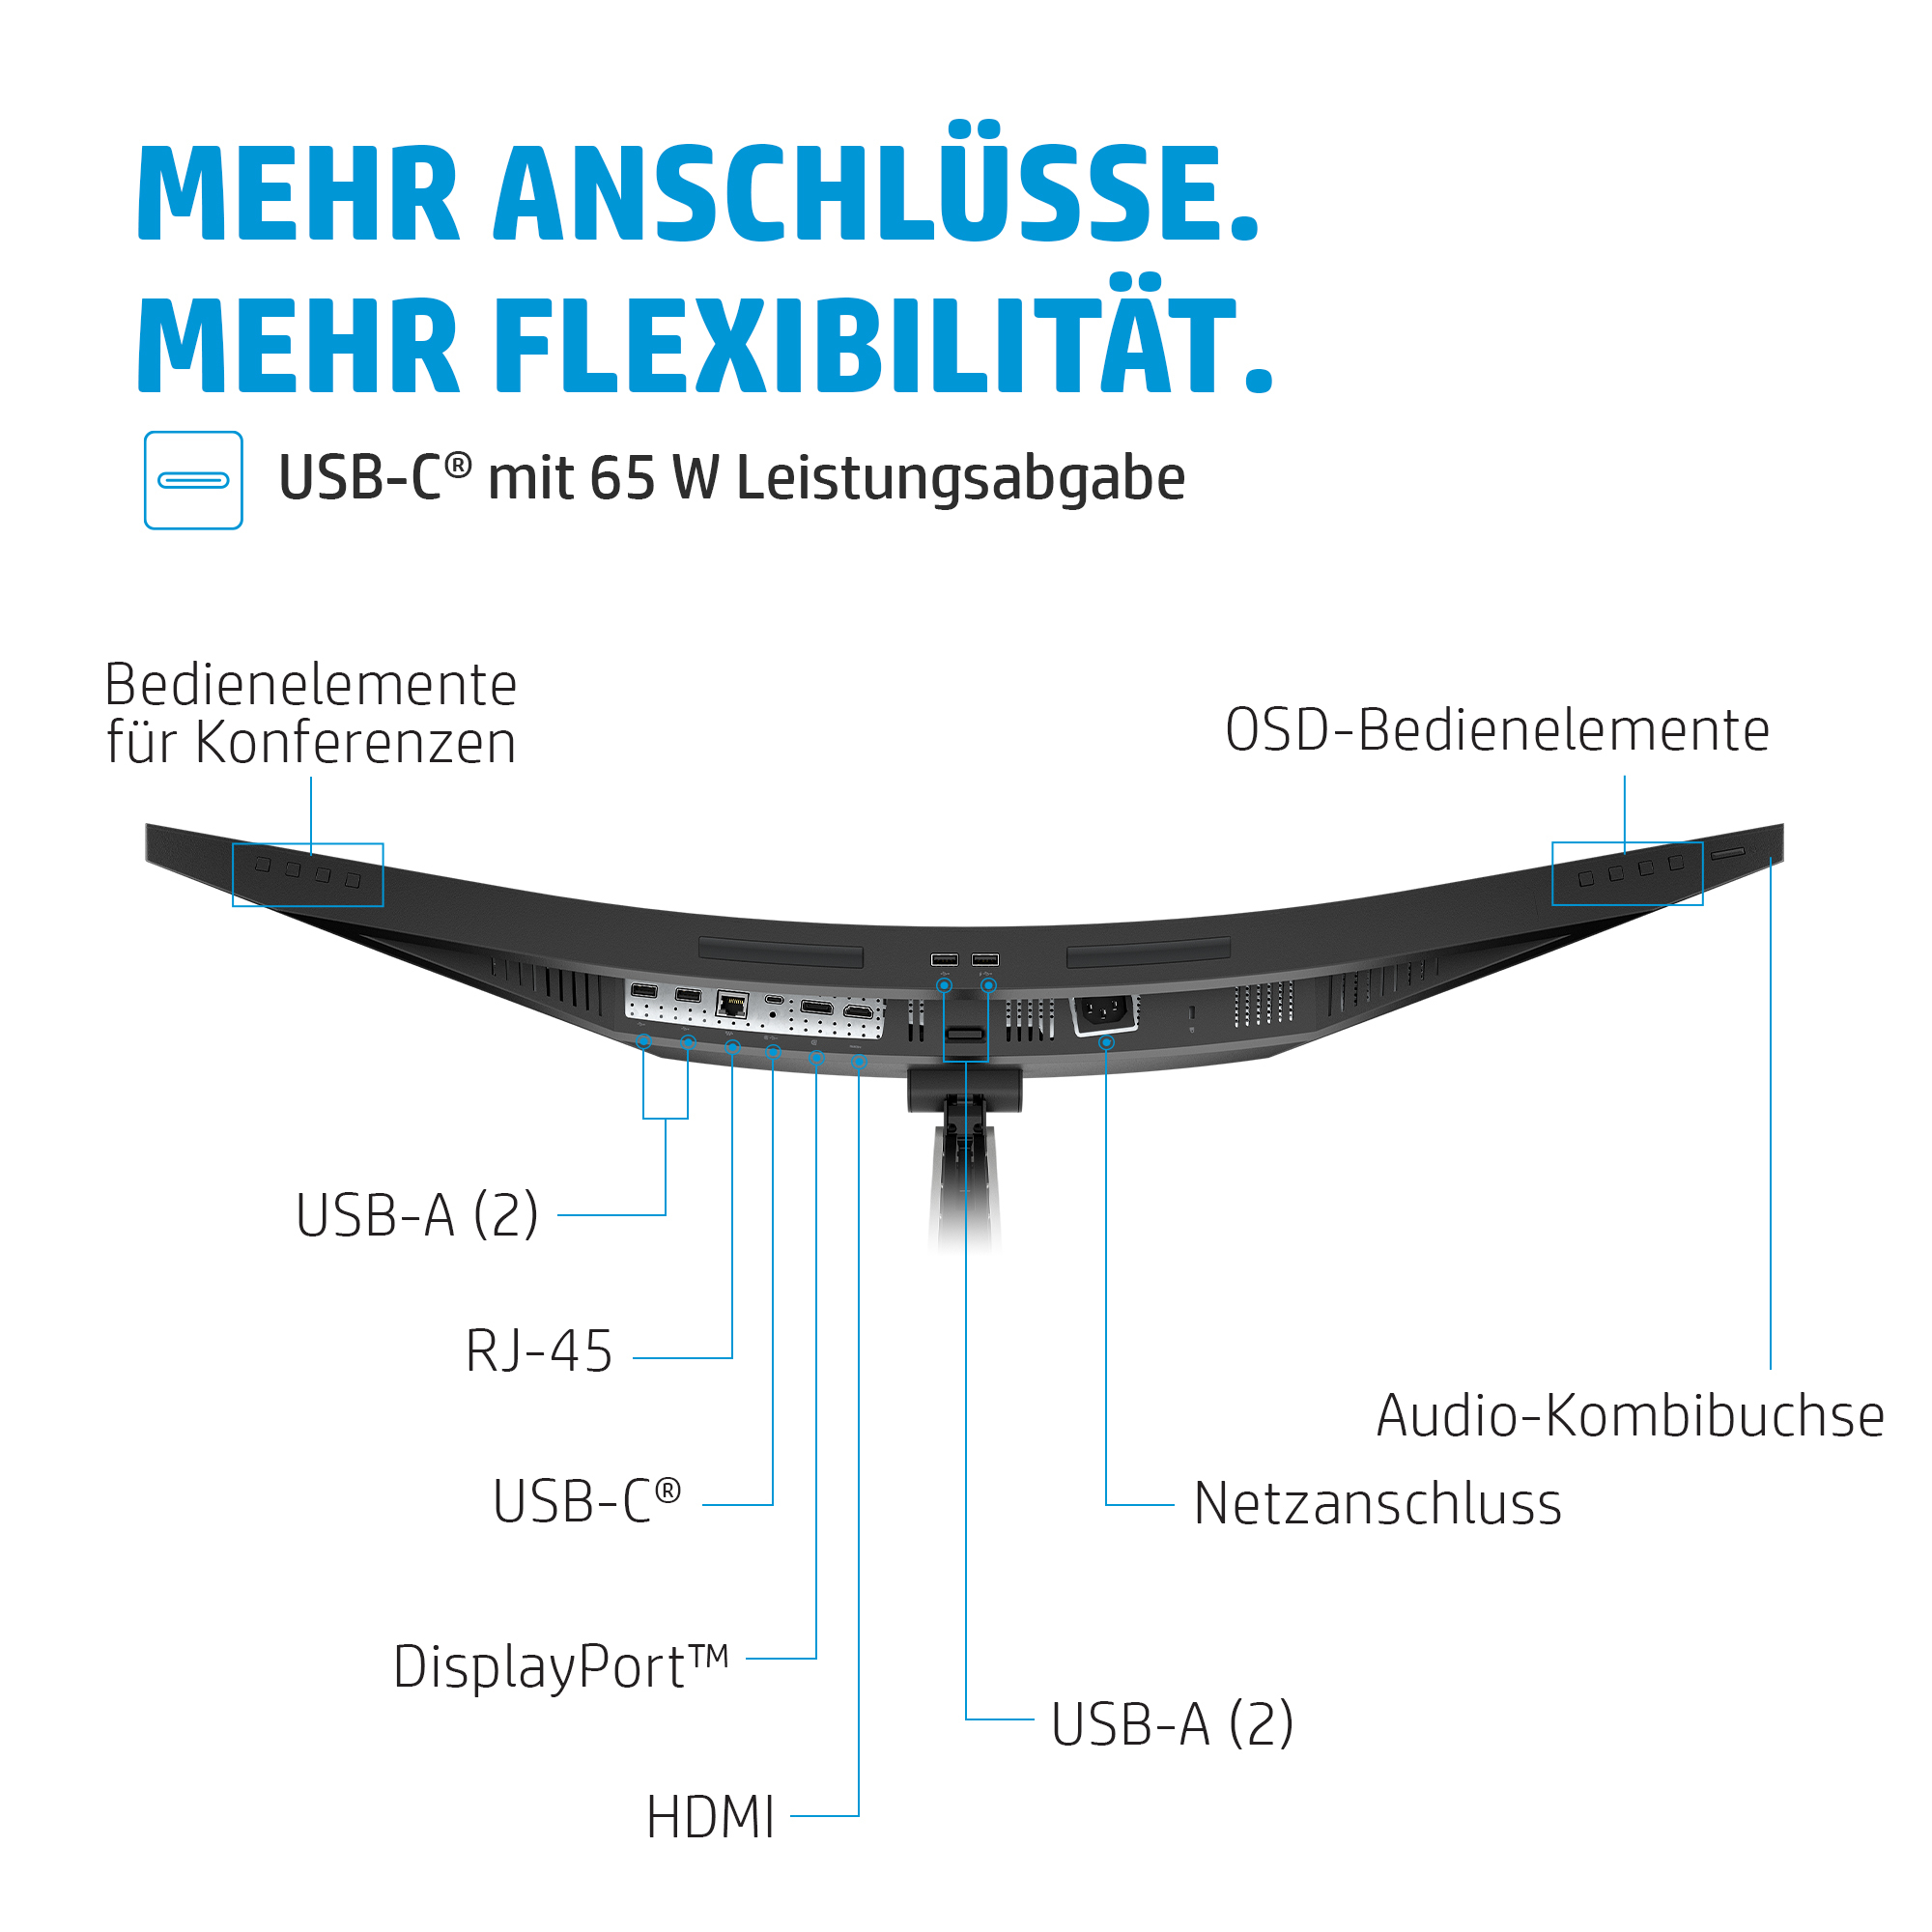 MON: HP E34m G4 34  Conferencing USB-C PD            - 3yrs wty